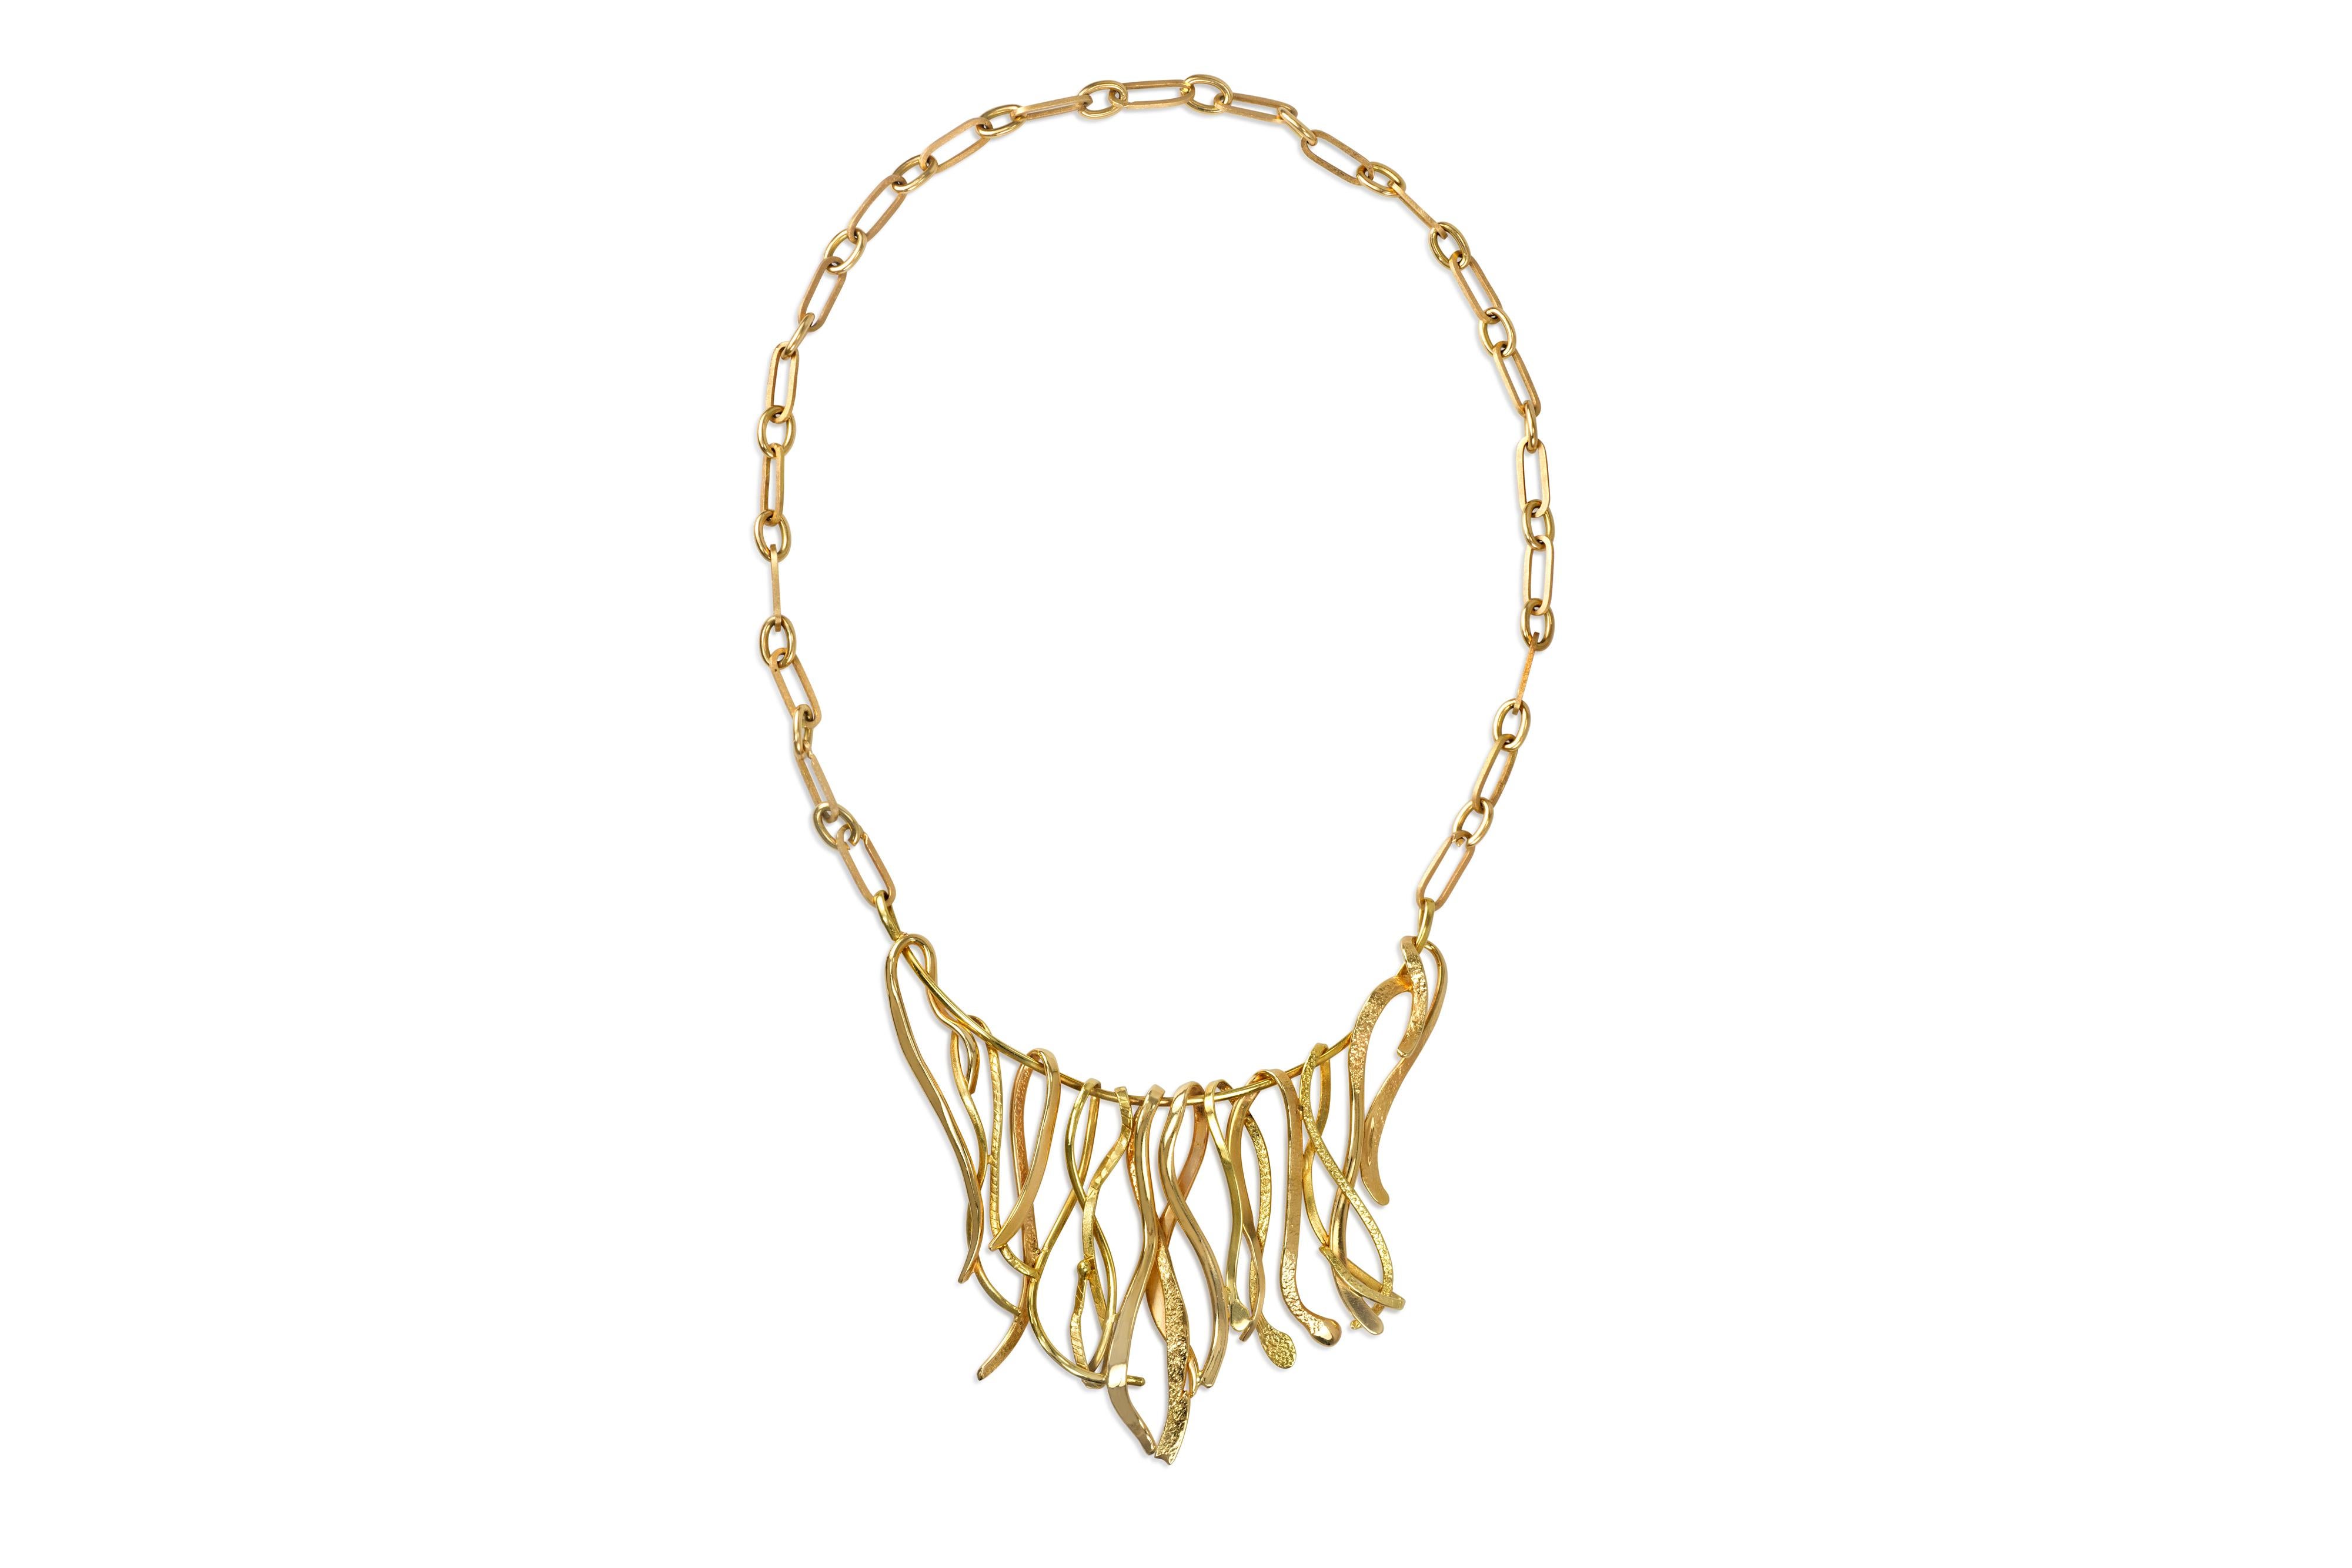 An 18 karat gold bib necklace, by the Swedish master goldsmith, Elon Arenhill, 1979. The necklace measures 19